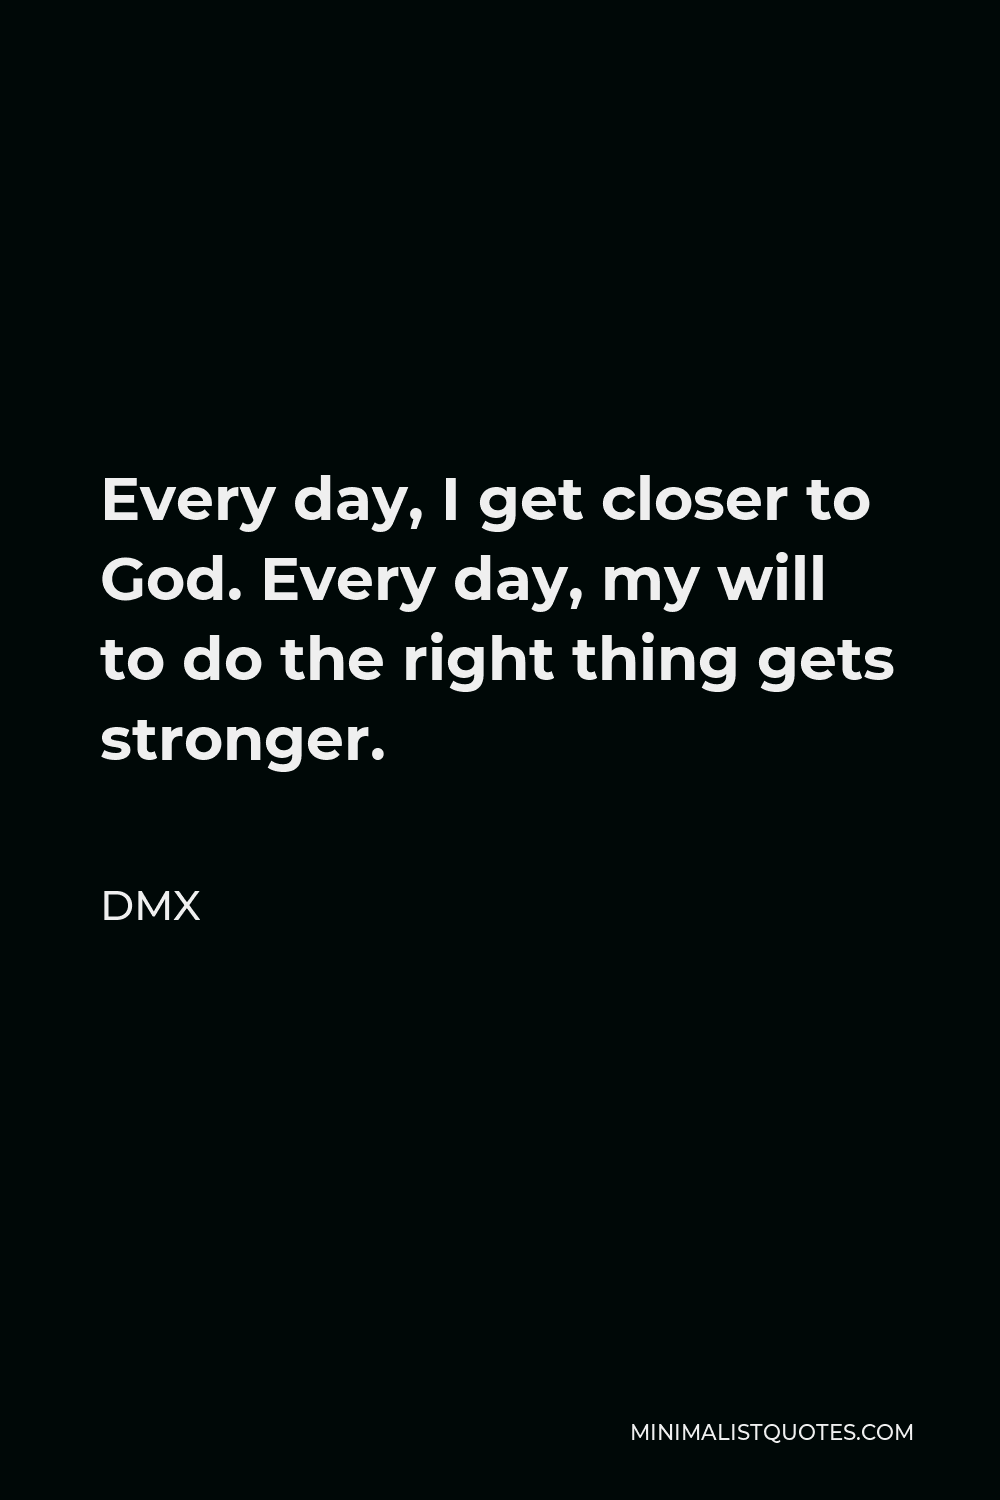 DMX Quote: The curse turned to grace when the hurt turned to faith.